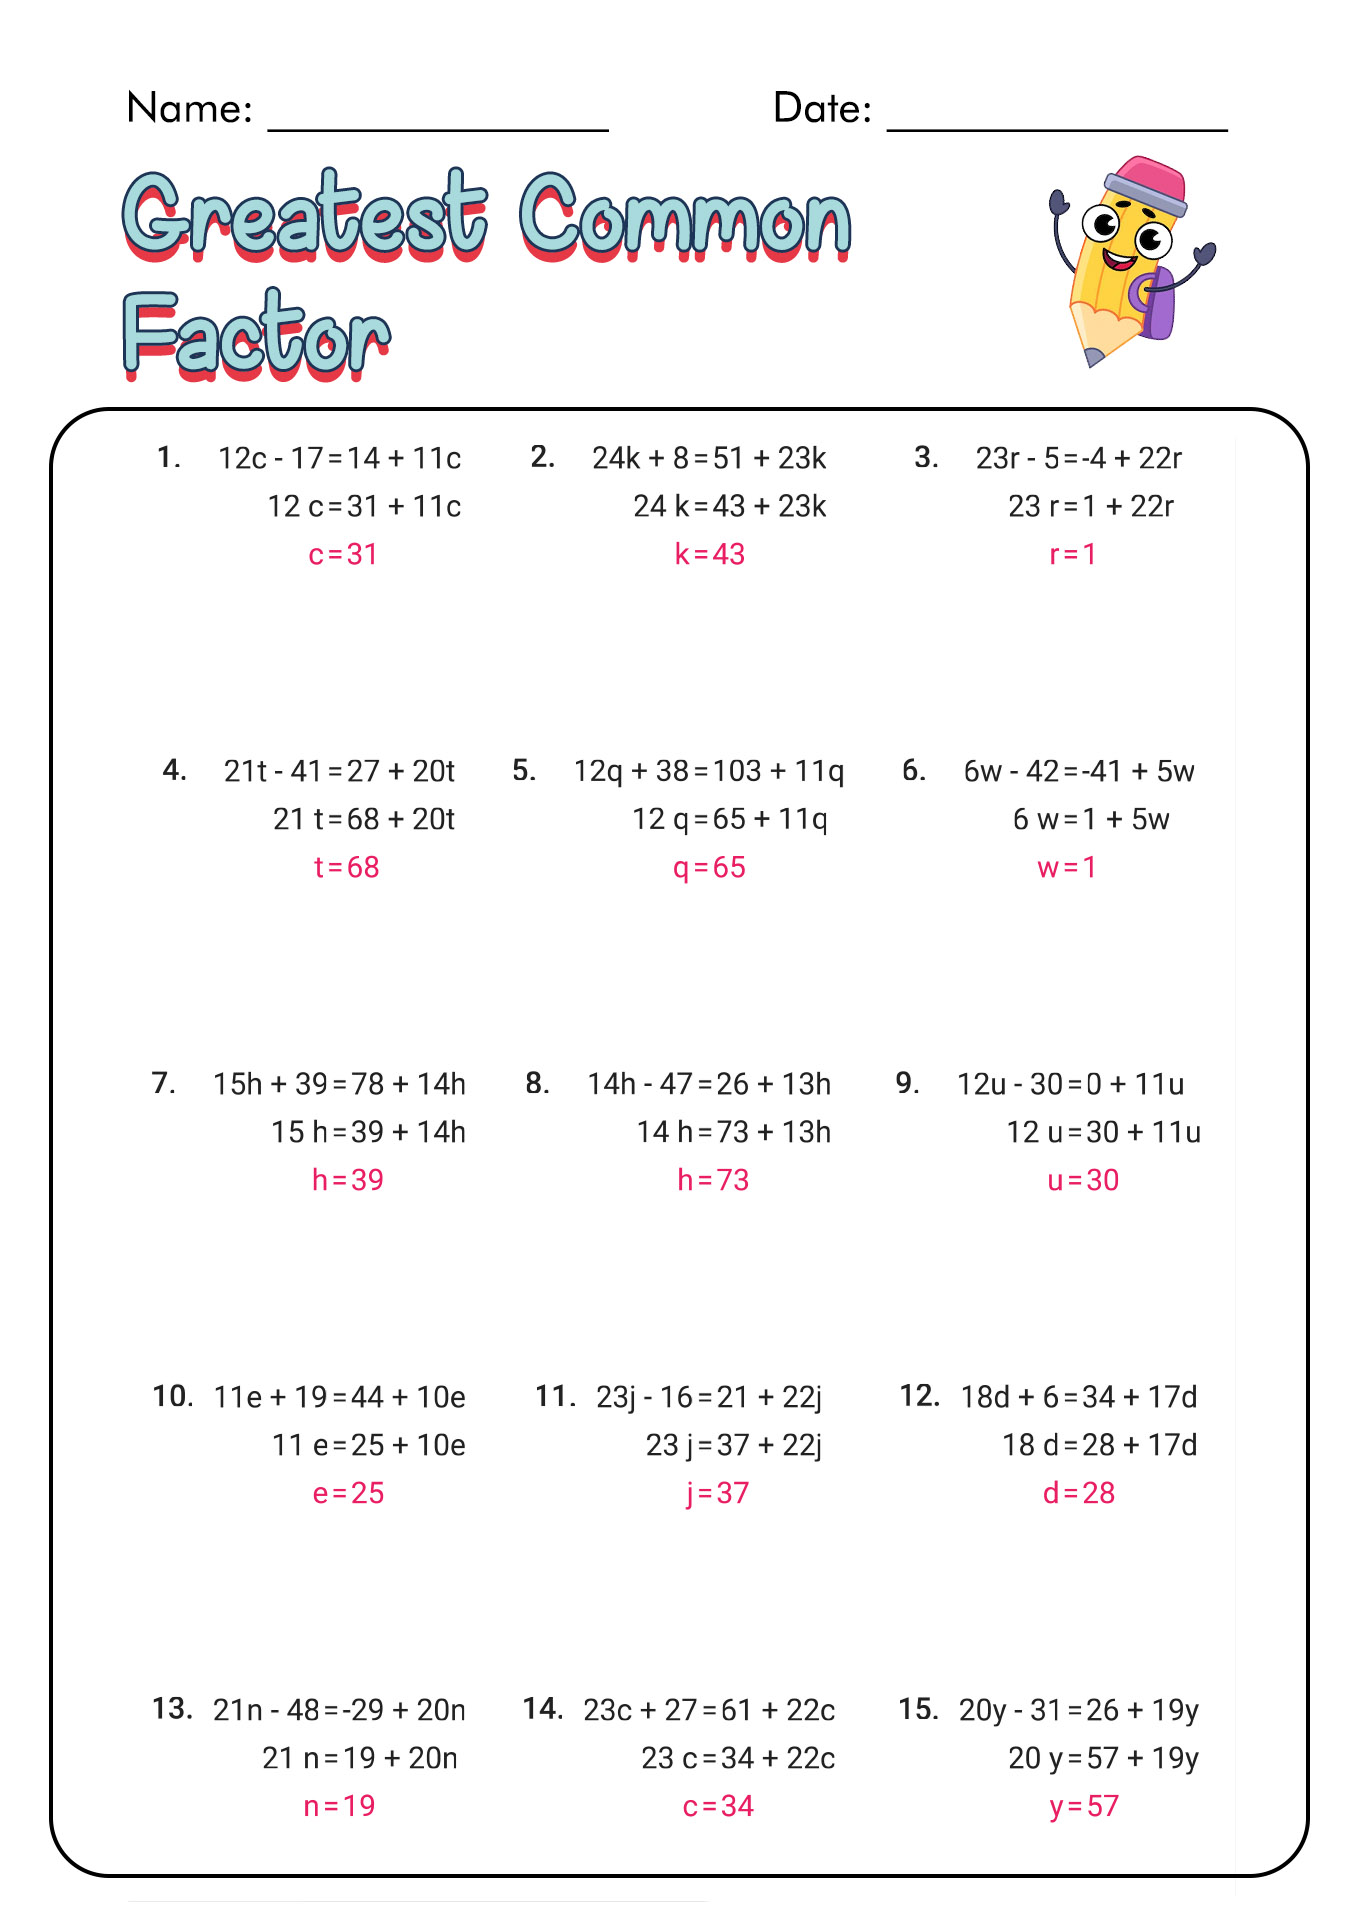 Greatest Common Factor Worksheet Answers